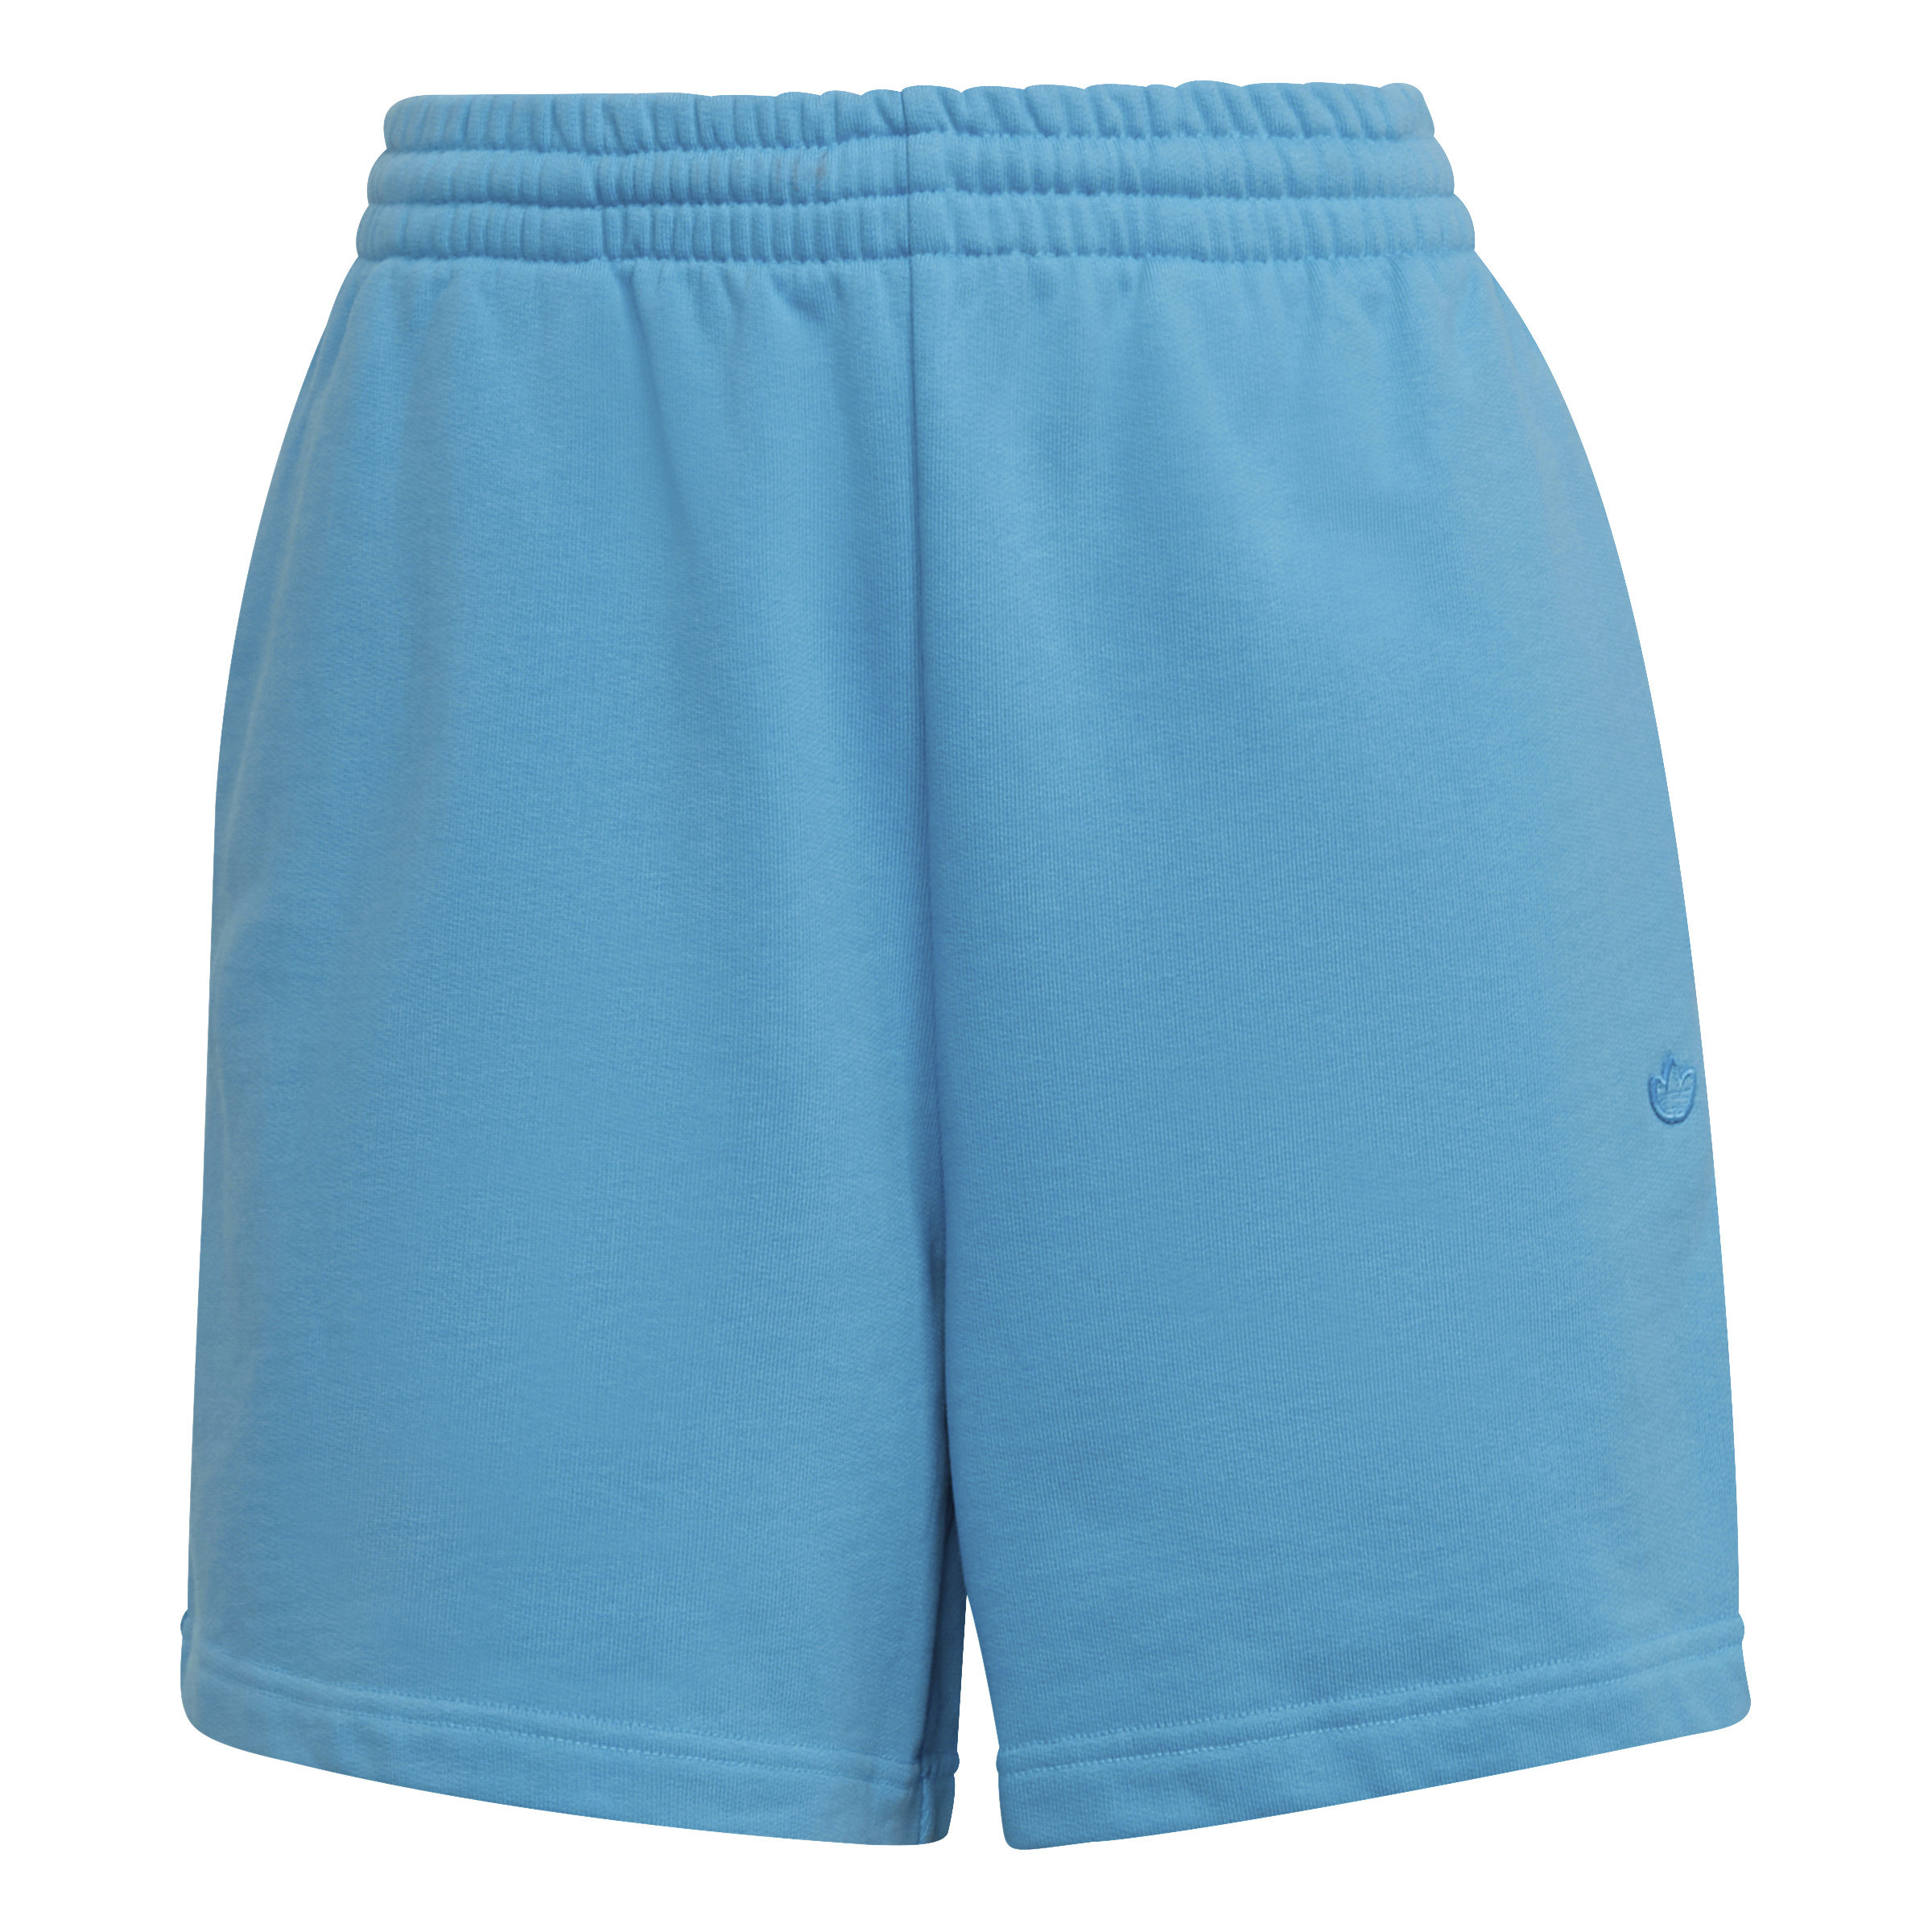 Short adicolor french terry, Light Blue, large image number 0